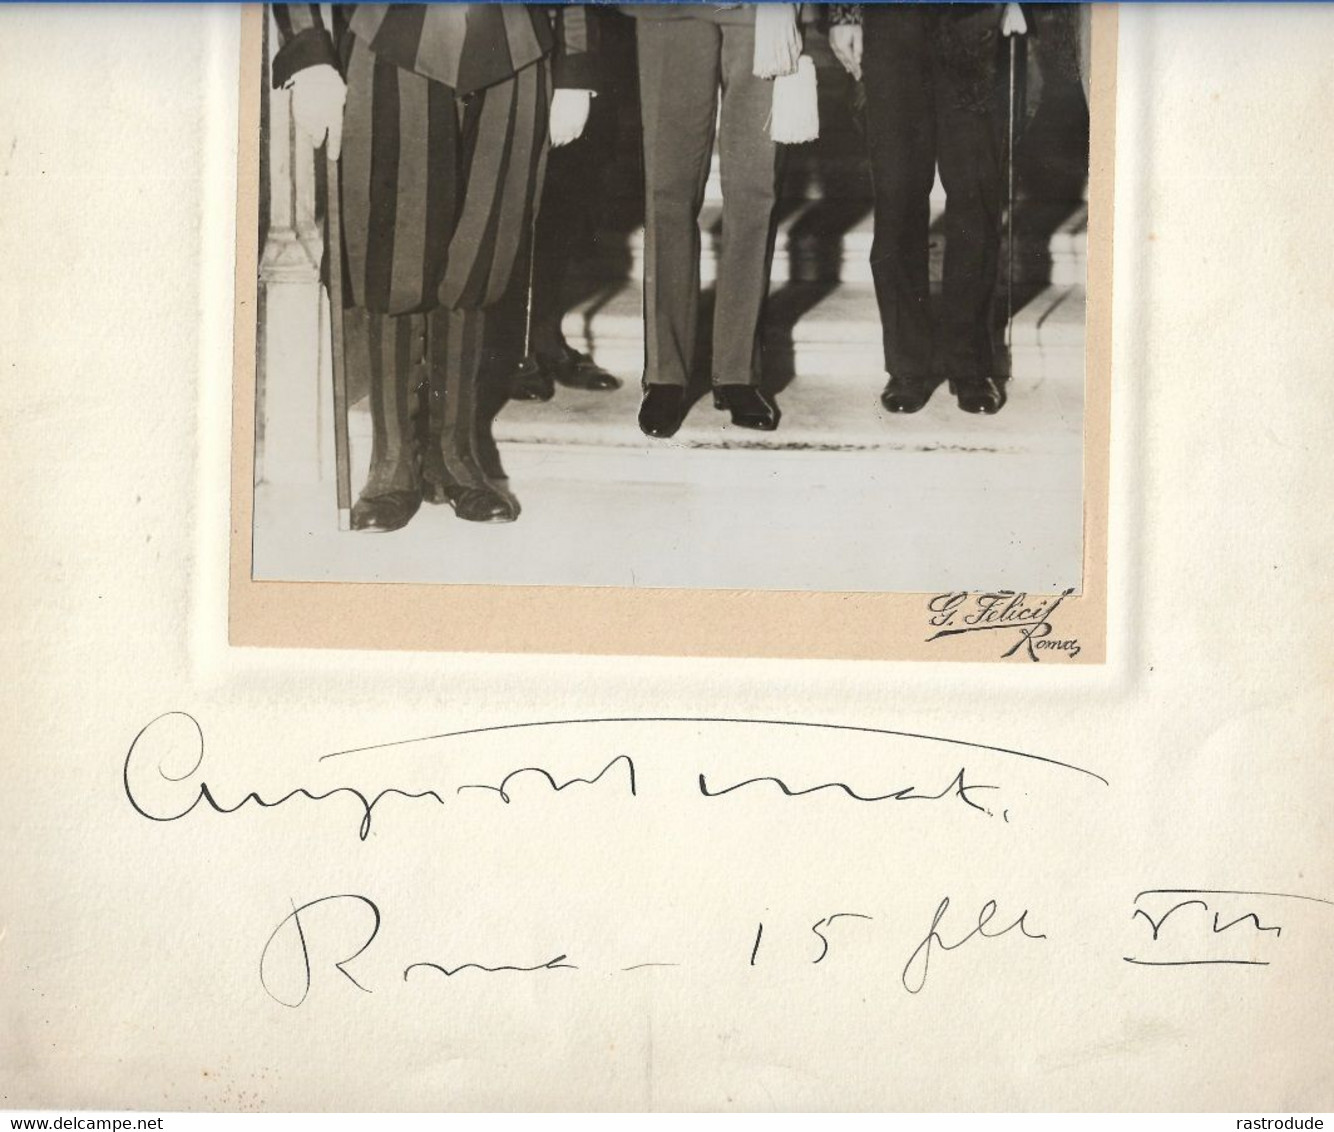 1930s ORIGINAL PHOTOGRAPH Of AUGUSTO TURATI In The VATICAN W. SWISS GUARD By GIUSEPPE FELICI - SIGNED - Signed Photographs